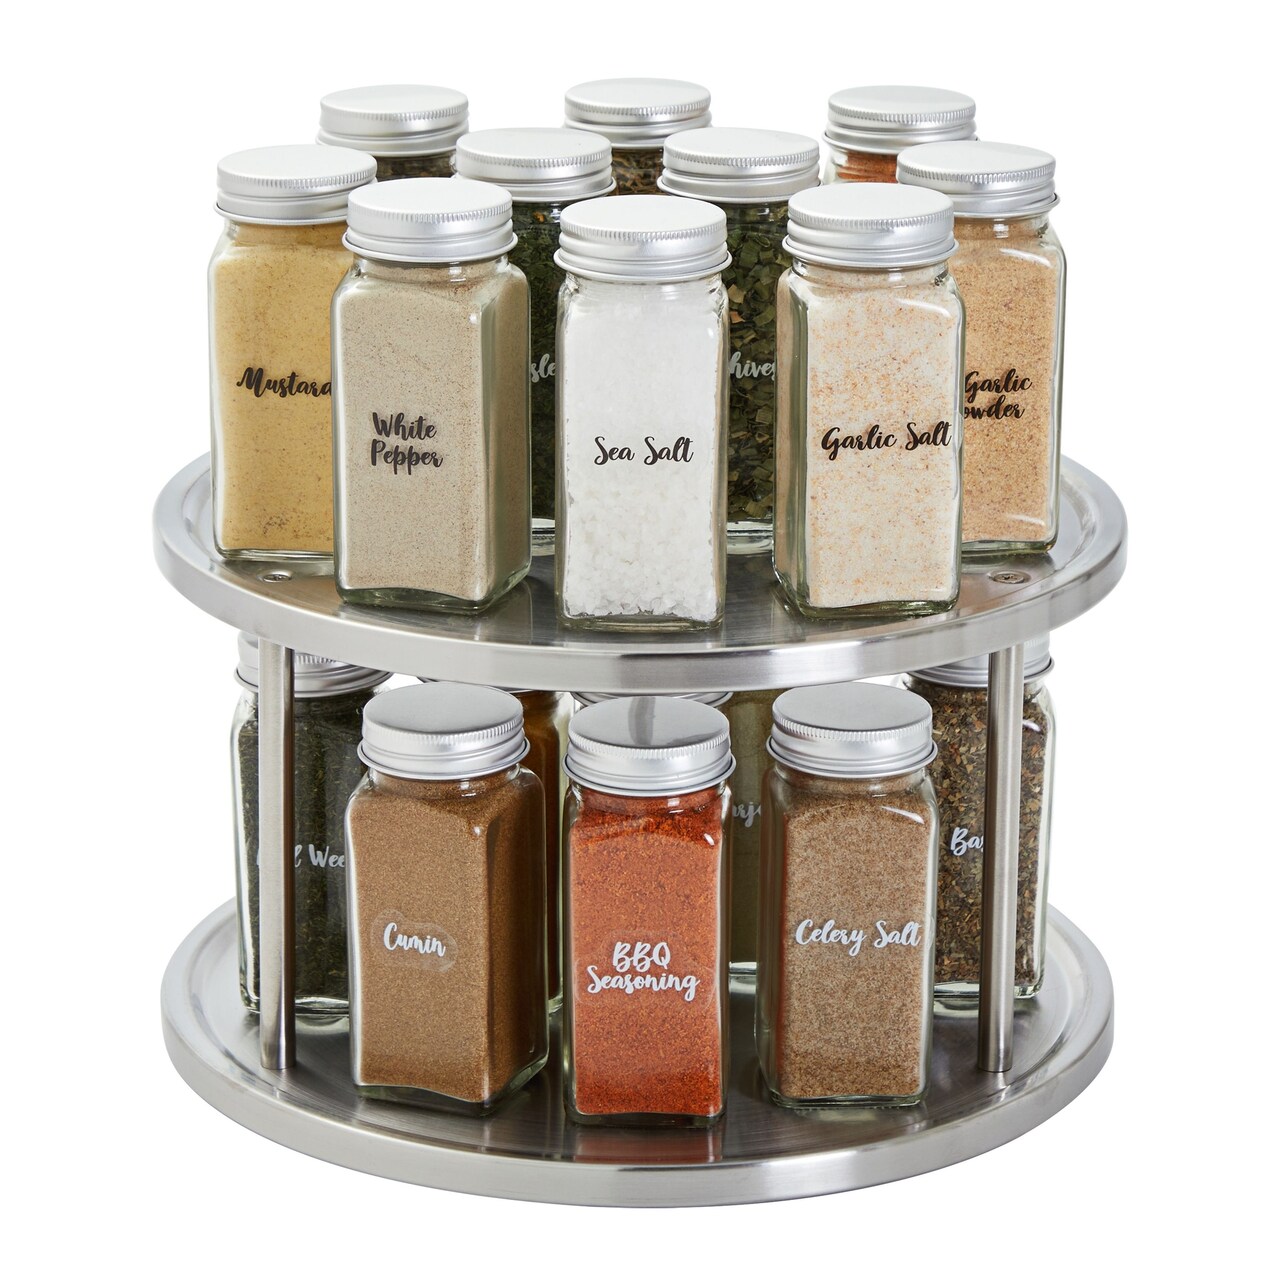 The Cabinet Caddy which is your ultimate modular rotating spice